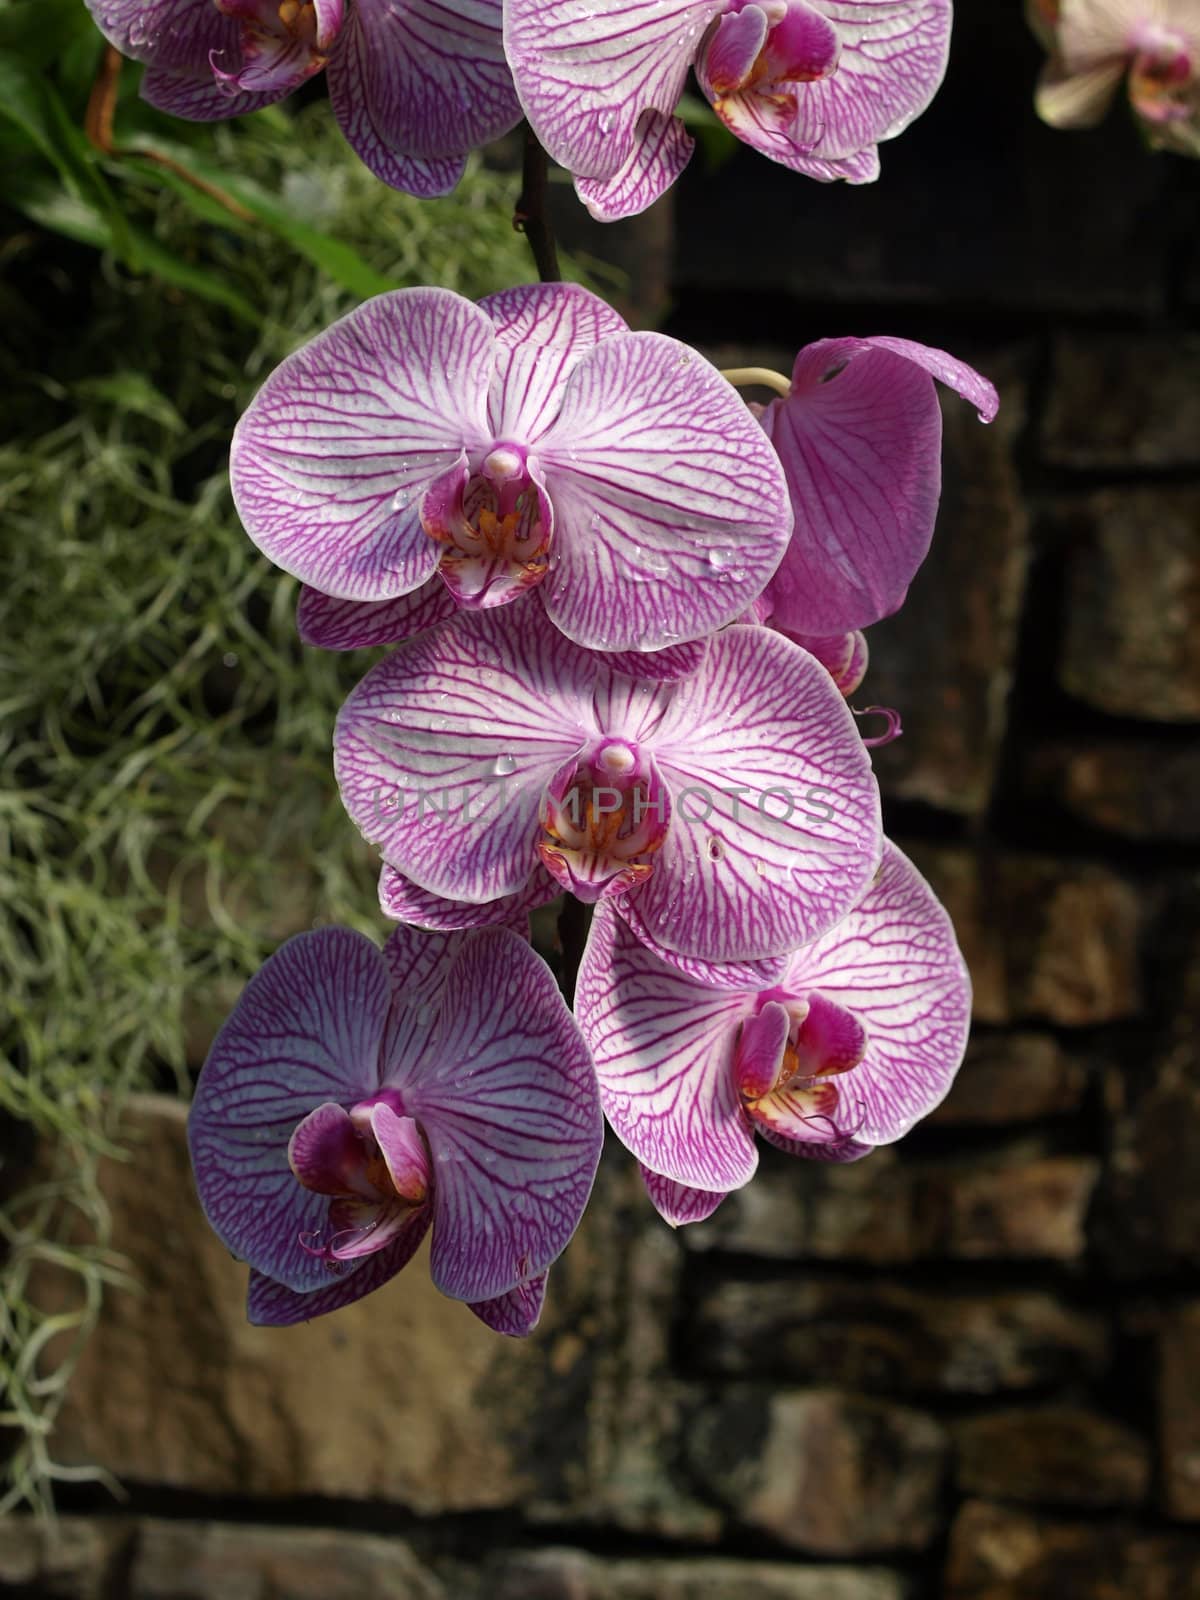 Purpil Orchids hanging in a garden and in full bloom